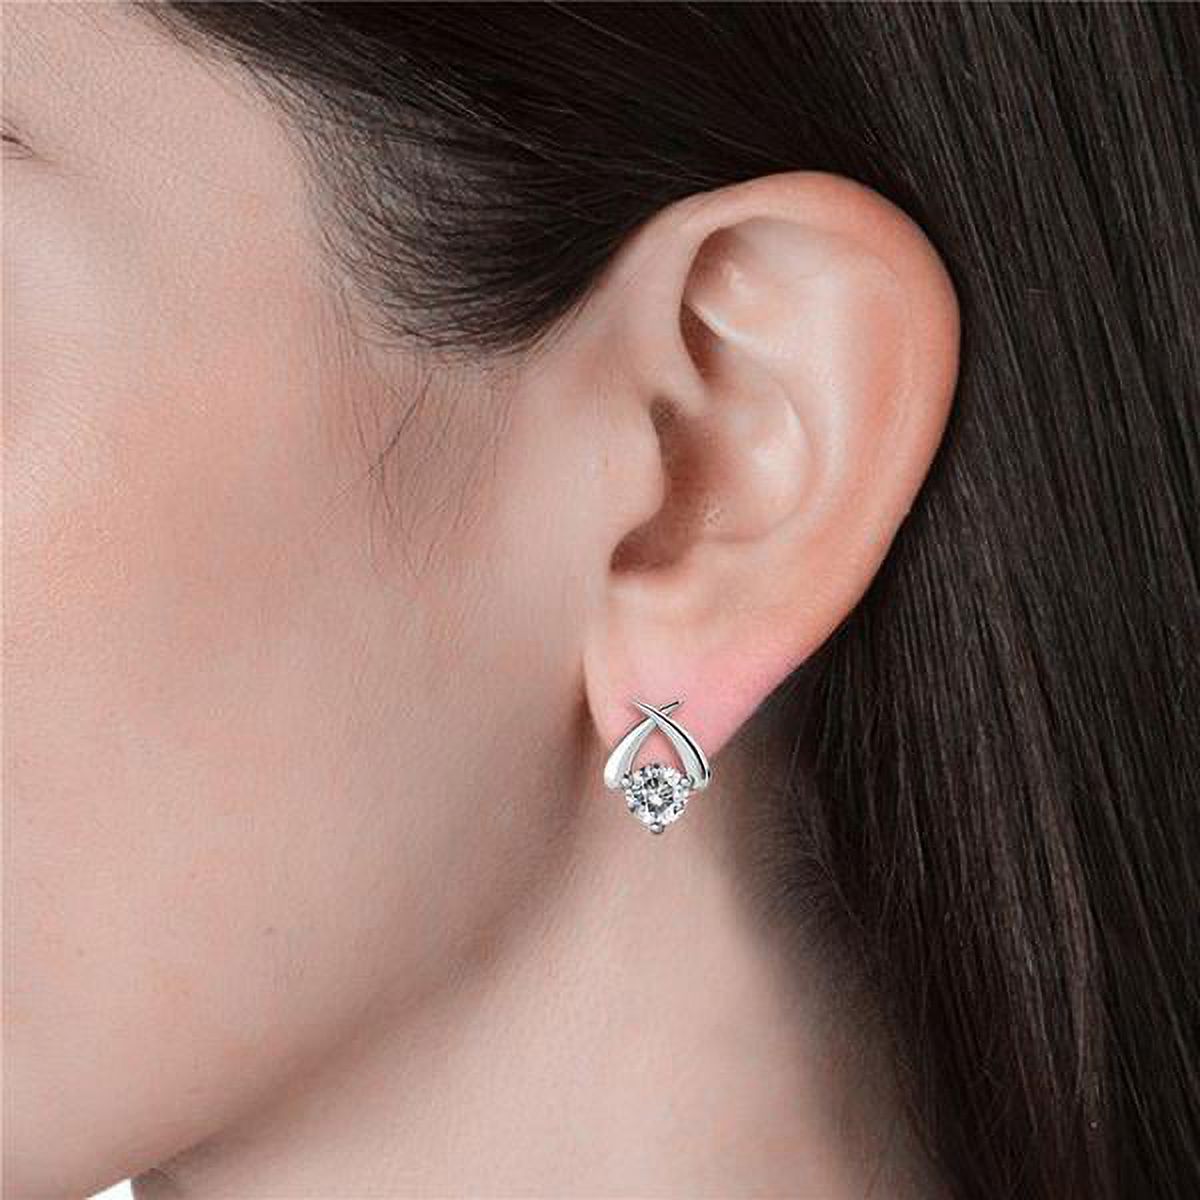 Cate & Chloe Eloise Modest Unique White Gold Stud Halo Earrings, 18k White Gold Plated Studs with Swarovski Crystals, Geometric Stud Earring Set Solitaire Round Cut Crystals - image 2 of 5